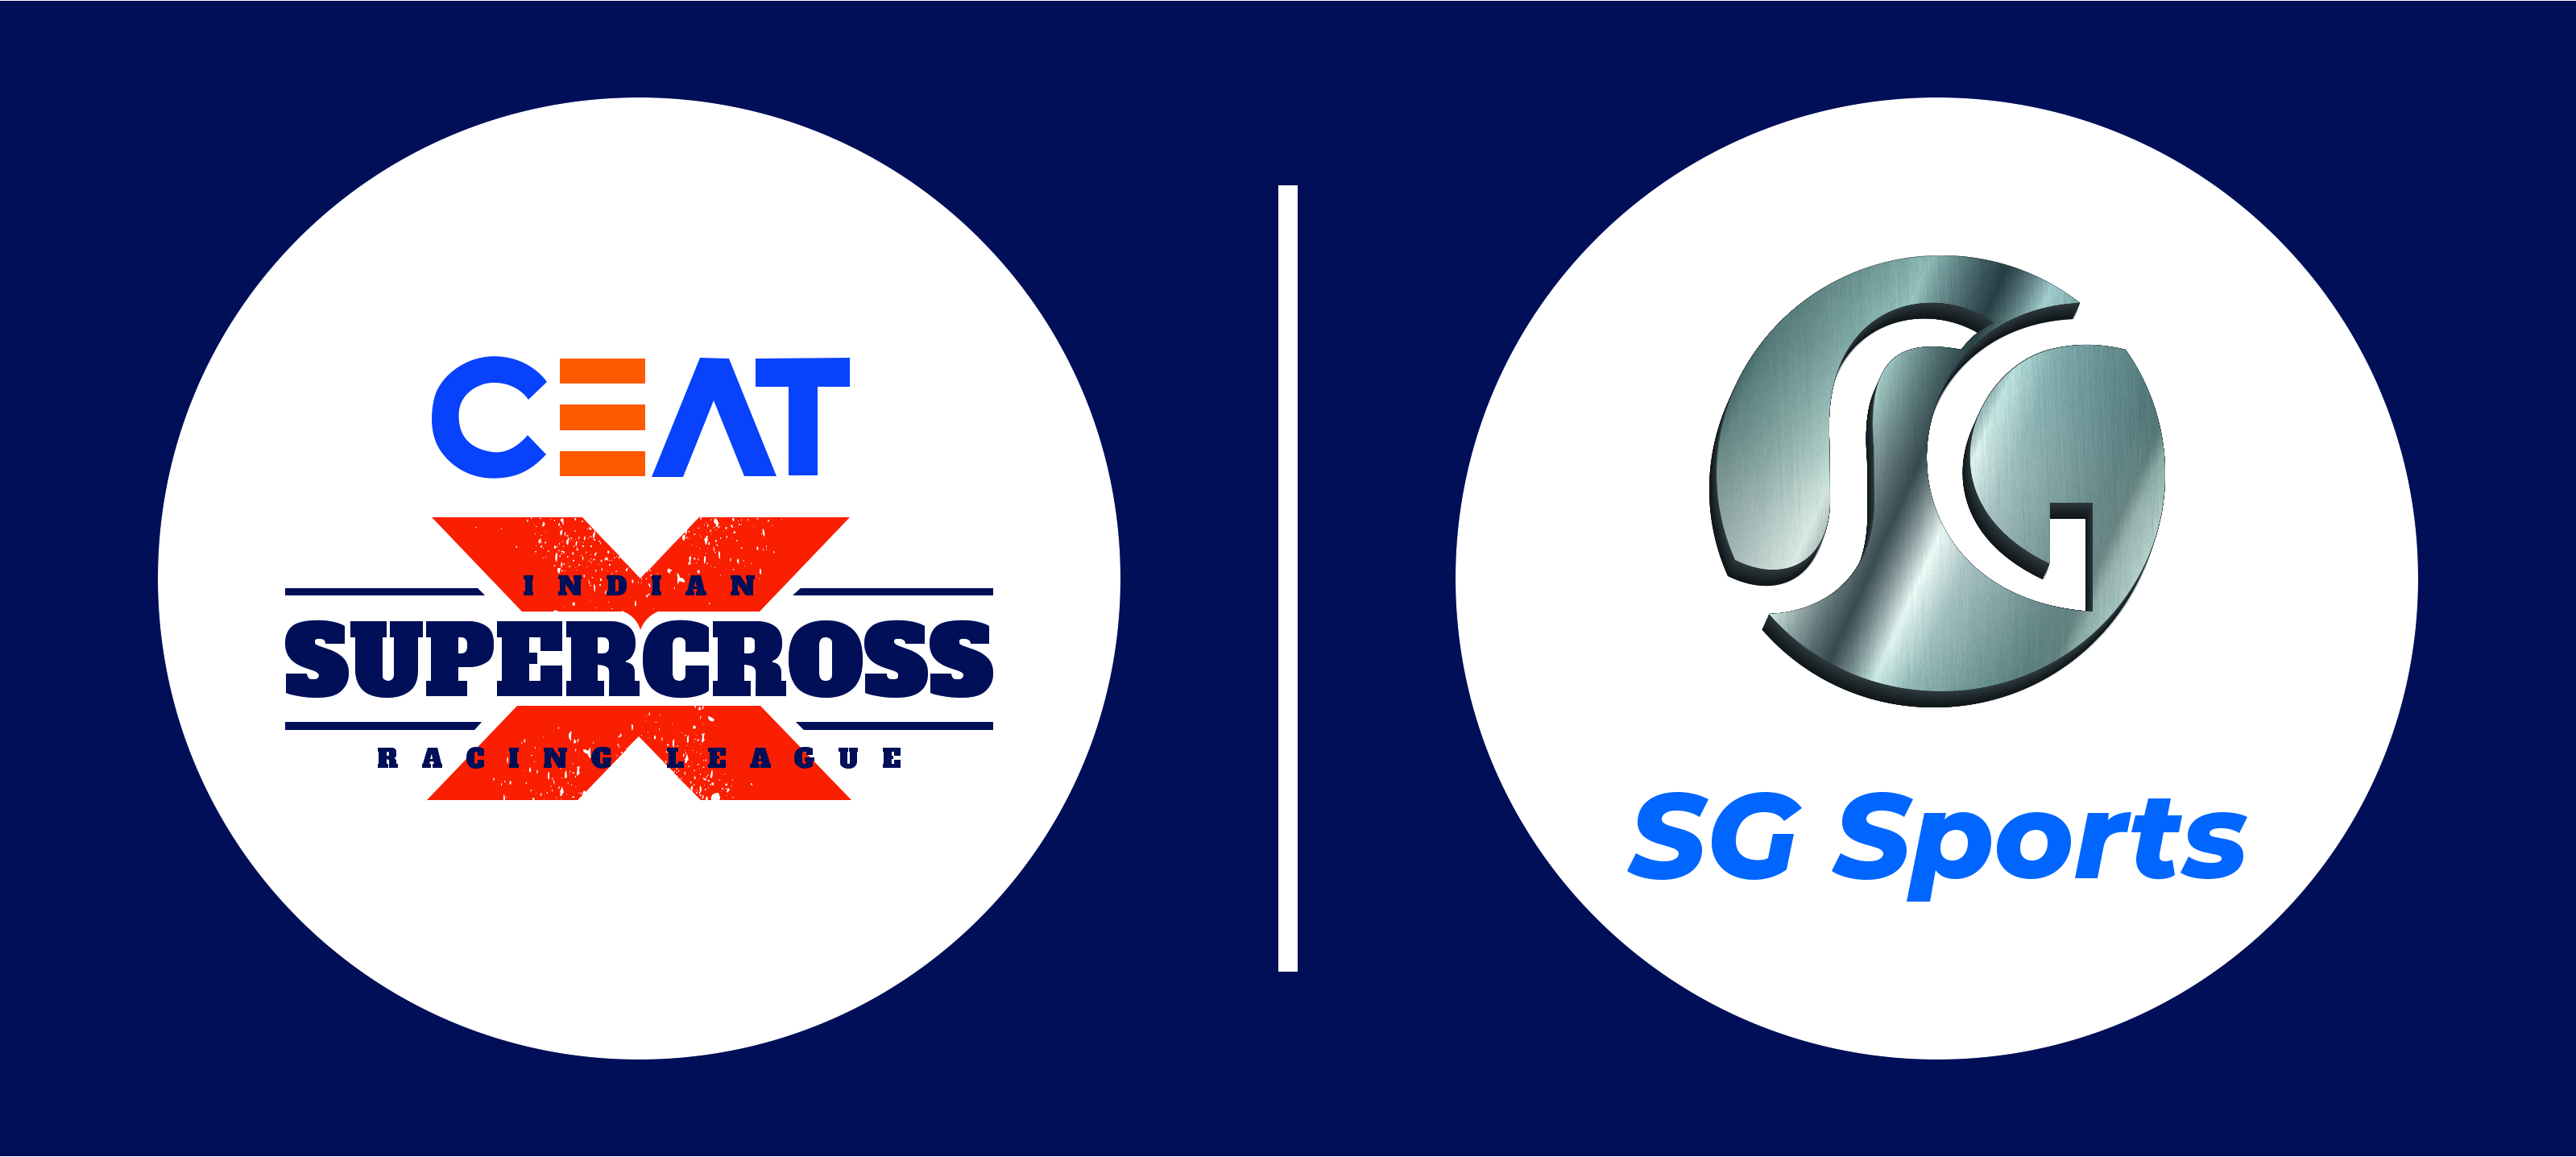 APL APOLLO led SG SPORTS ACQUIRES A FRANCHISE TEAM AT THE CEAT INDIAN SUPERCROSS RACING LEAGUE